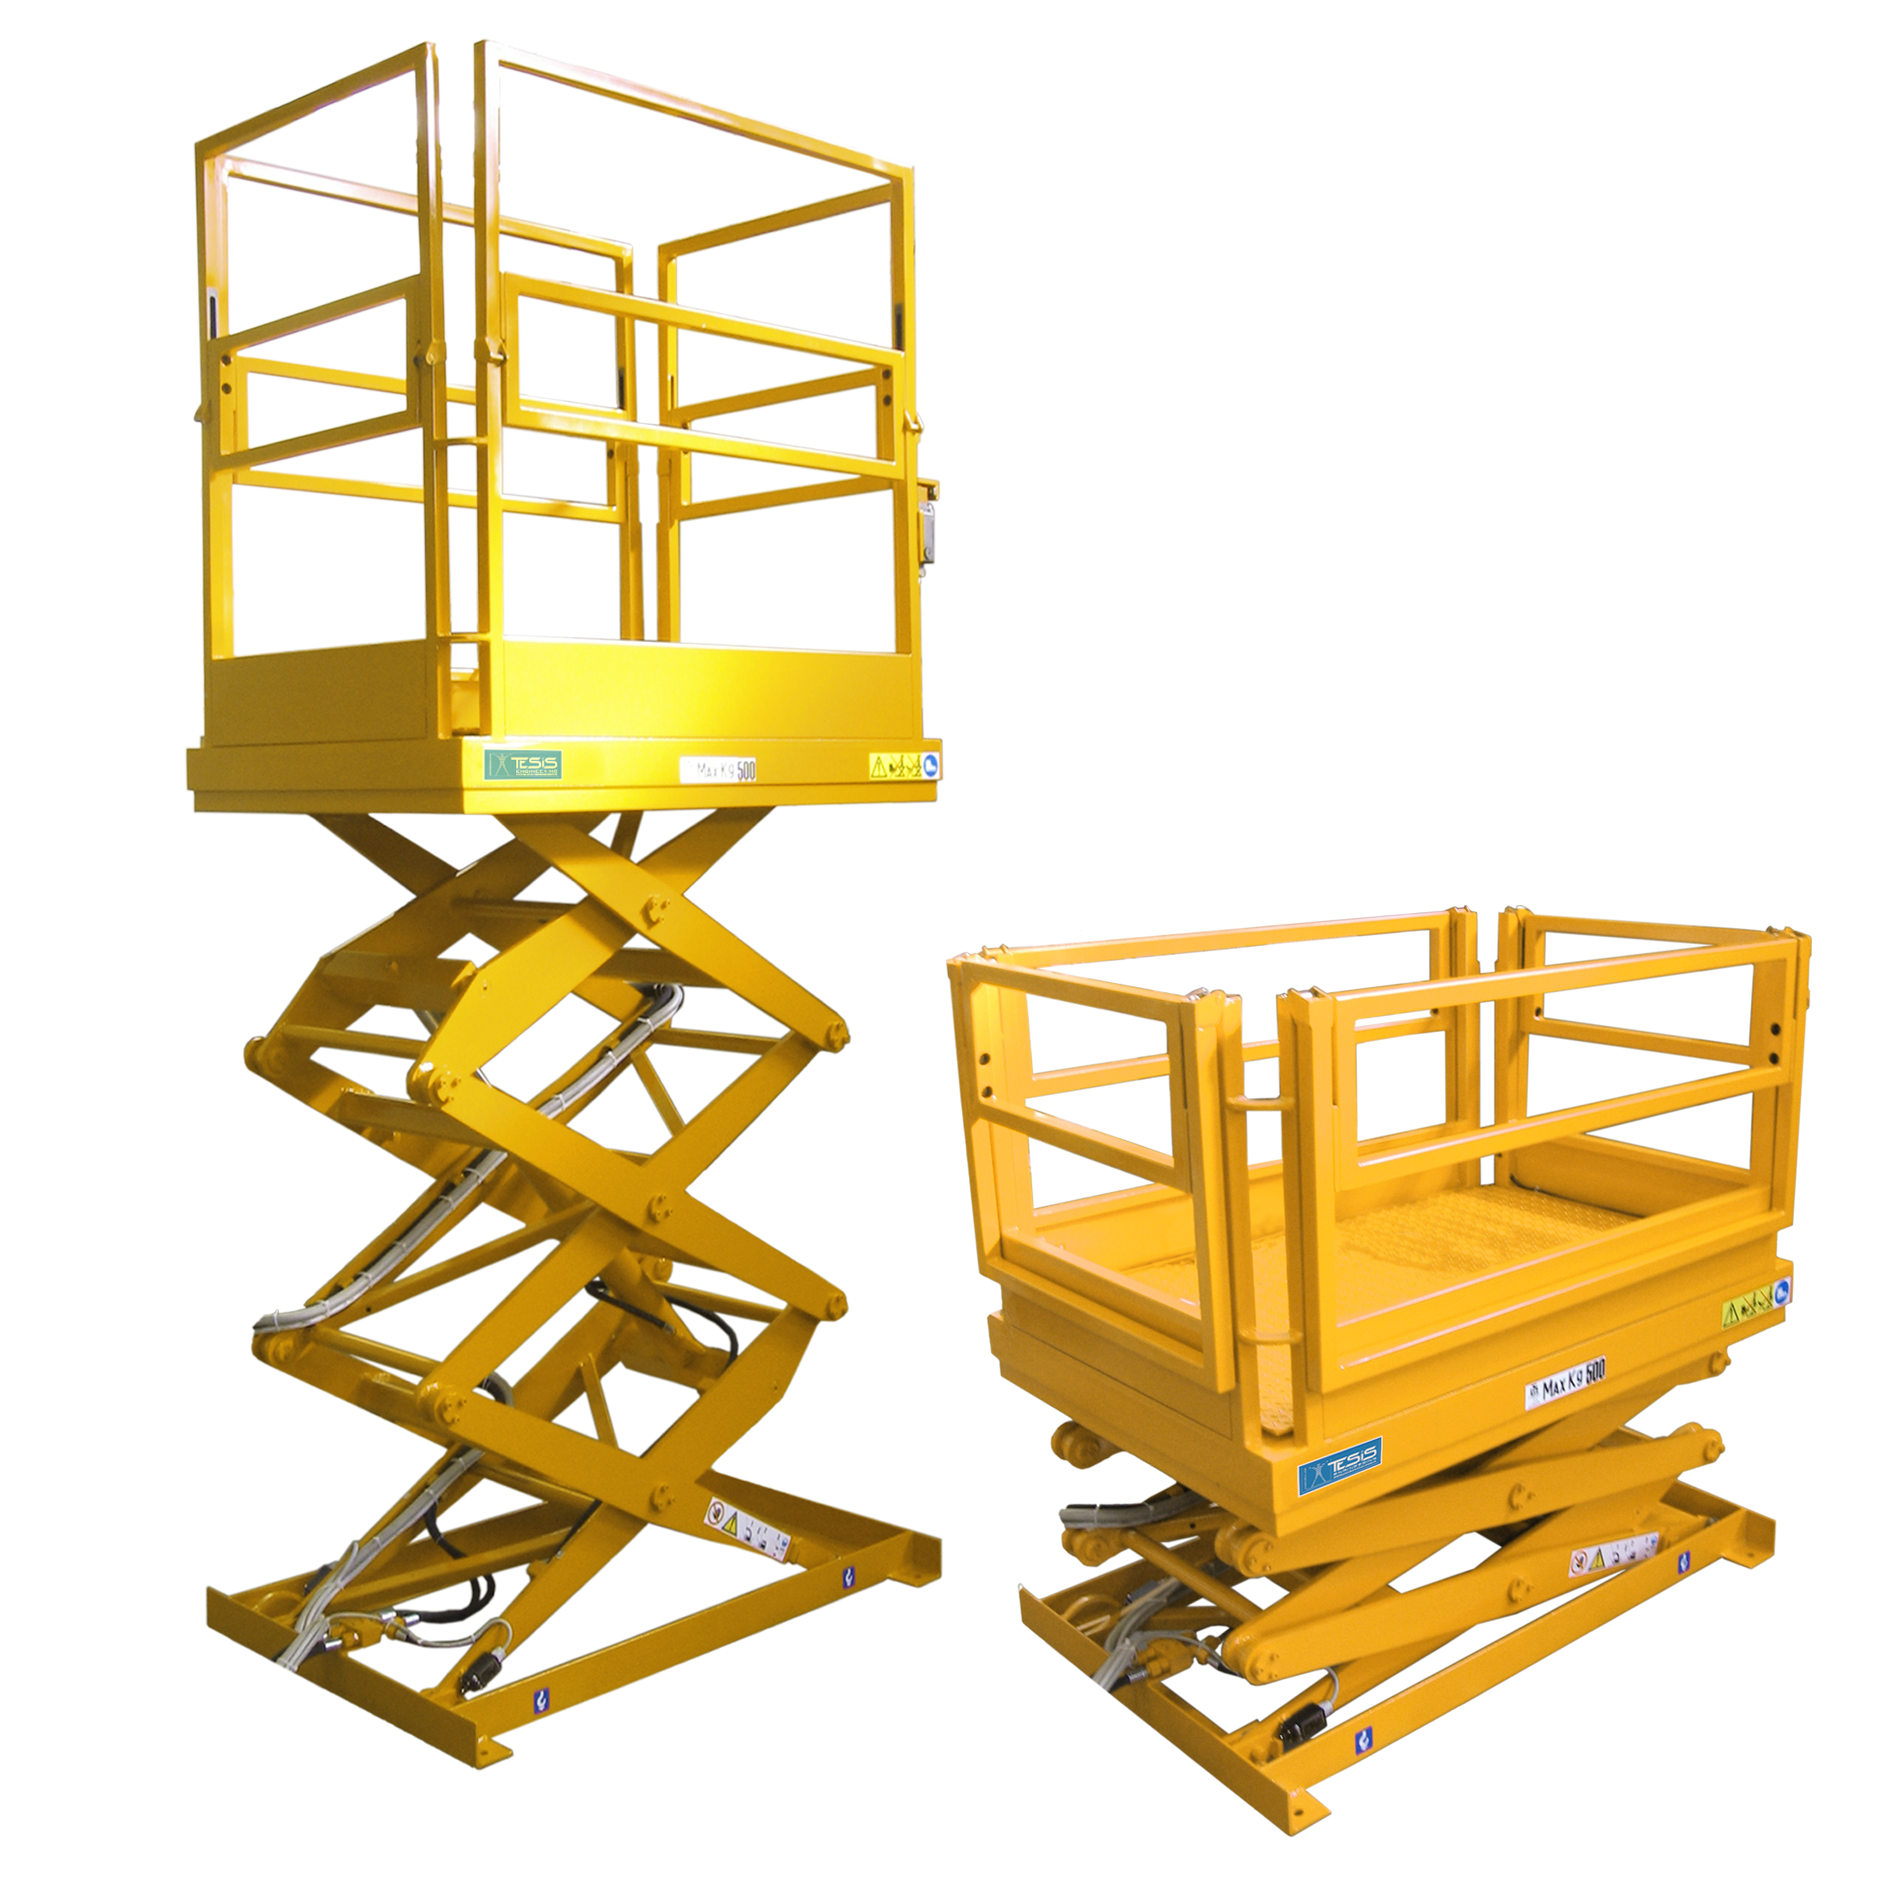 Elevating work platform for fixed workstation with height-adjustable guardrails - carousel scissor lifts - worker elevating platforms - worker scissor lifts - carousel lift tables